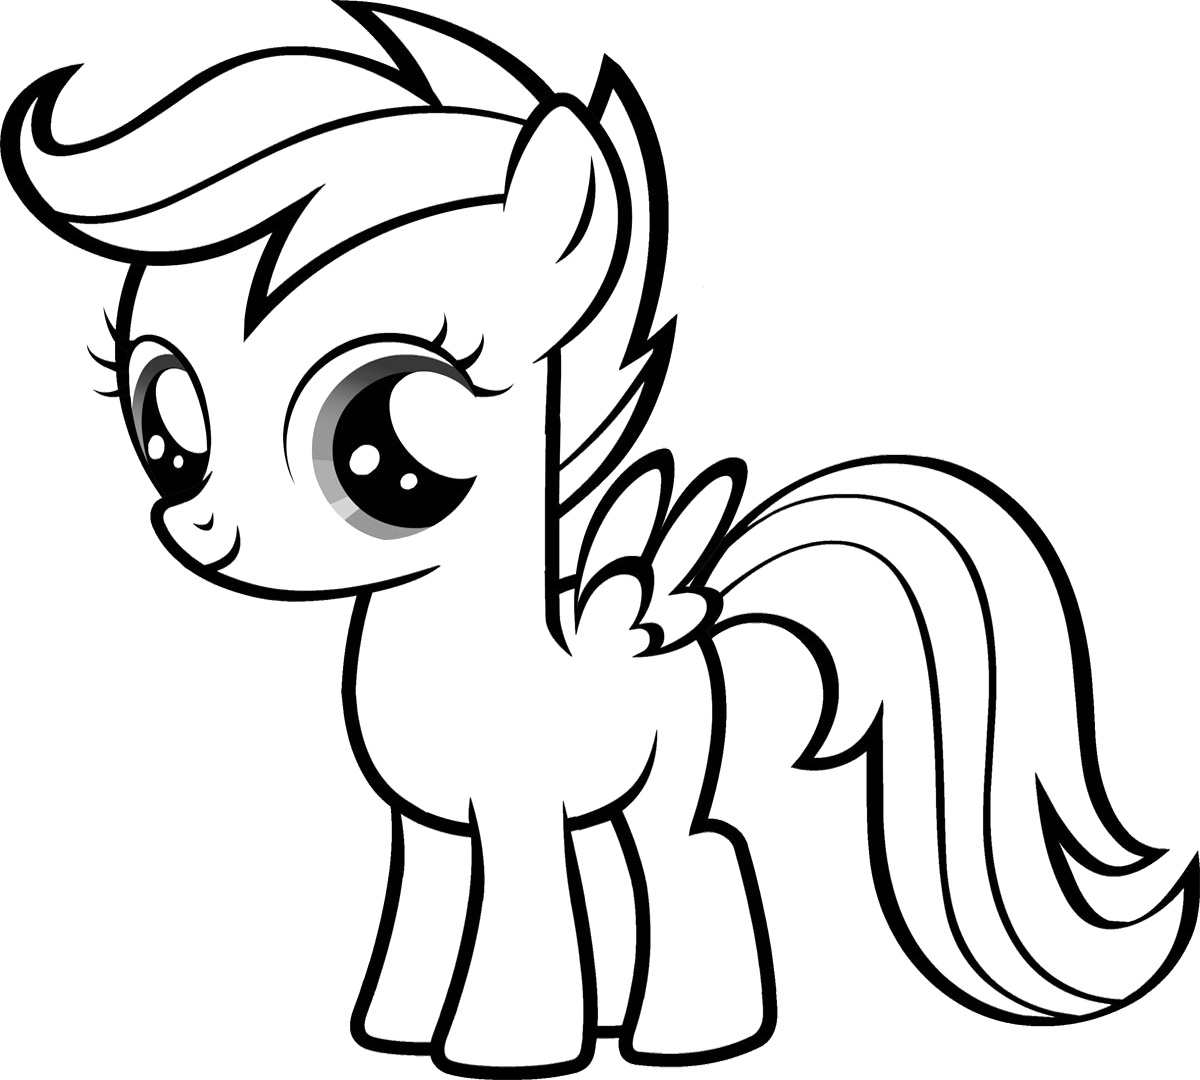 Cute Pony Coloring Pages at GetColorings.com | Free printable colorings